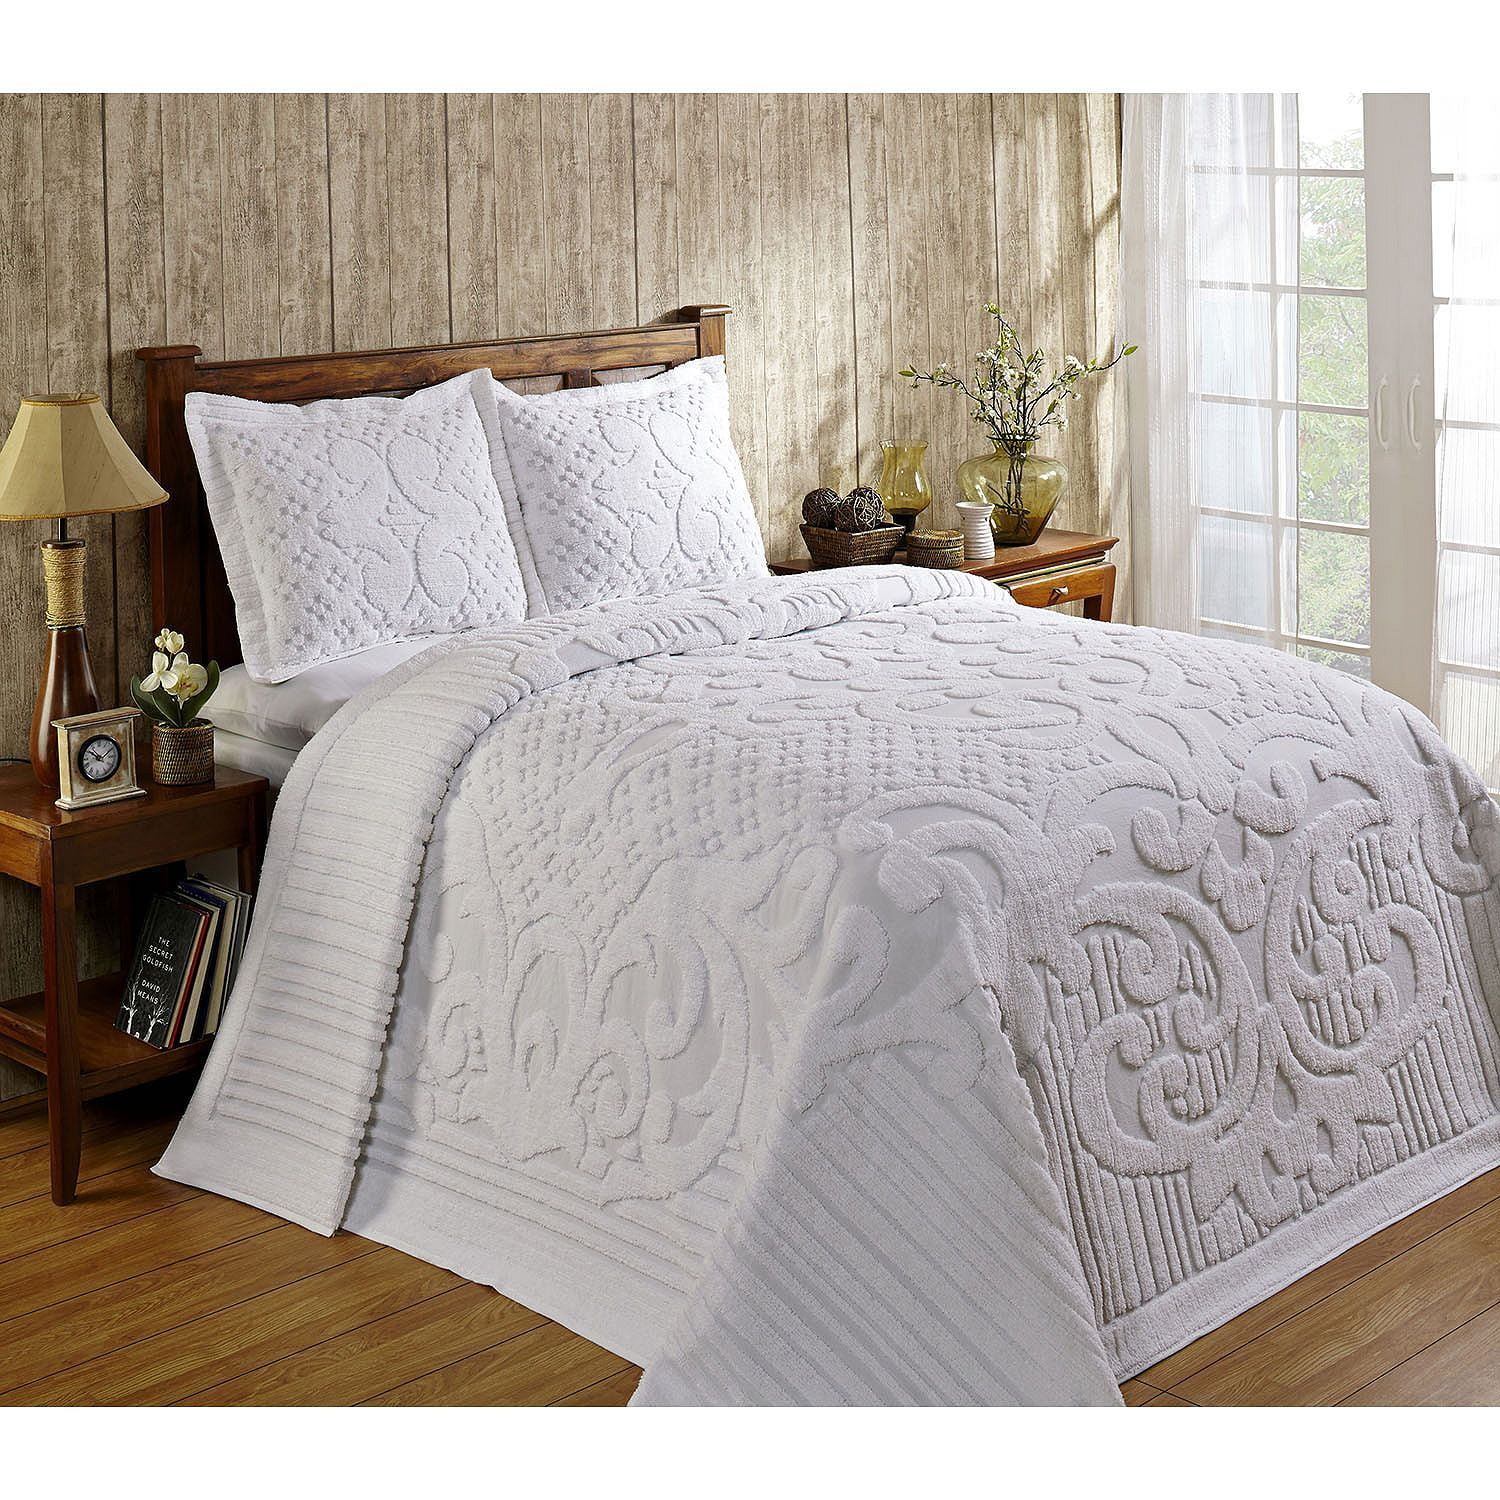 ASHTON HEAVYWEIGHT CHENILLE BEDSPREAD AND PILLOW SHAM COMPLETE SET ALL COTTON 